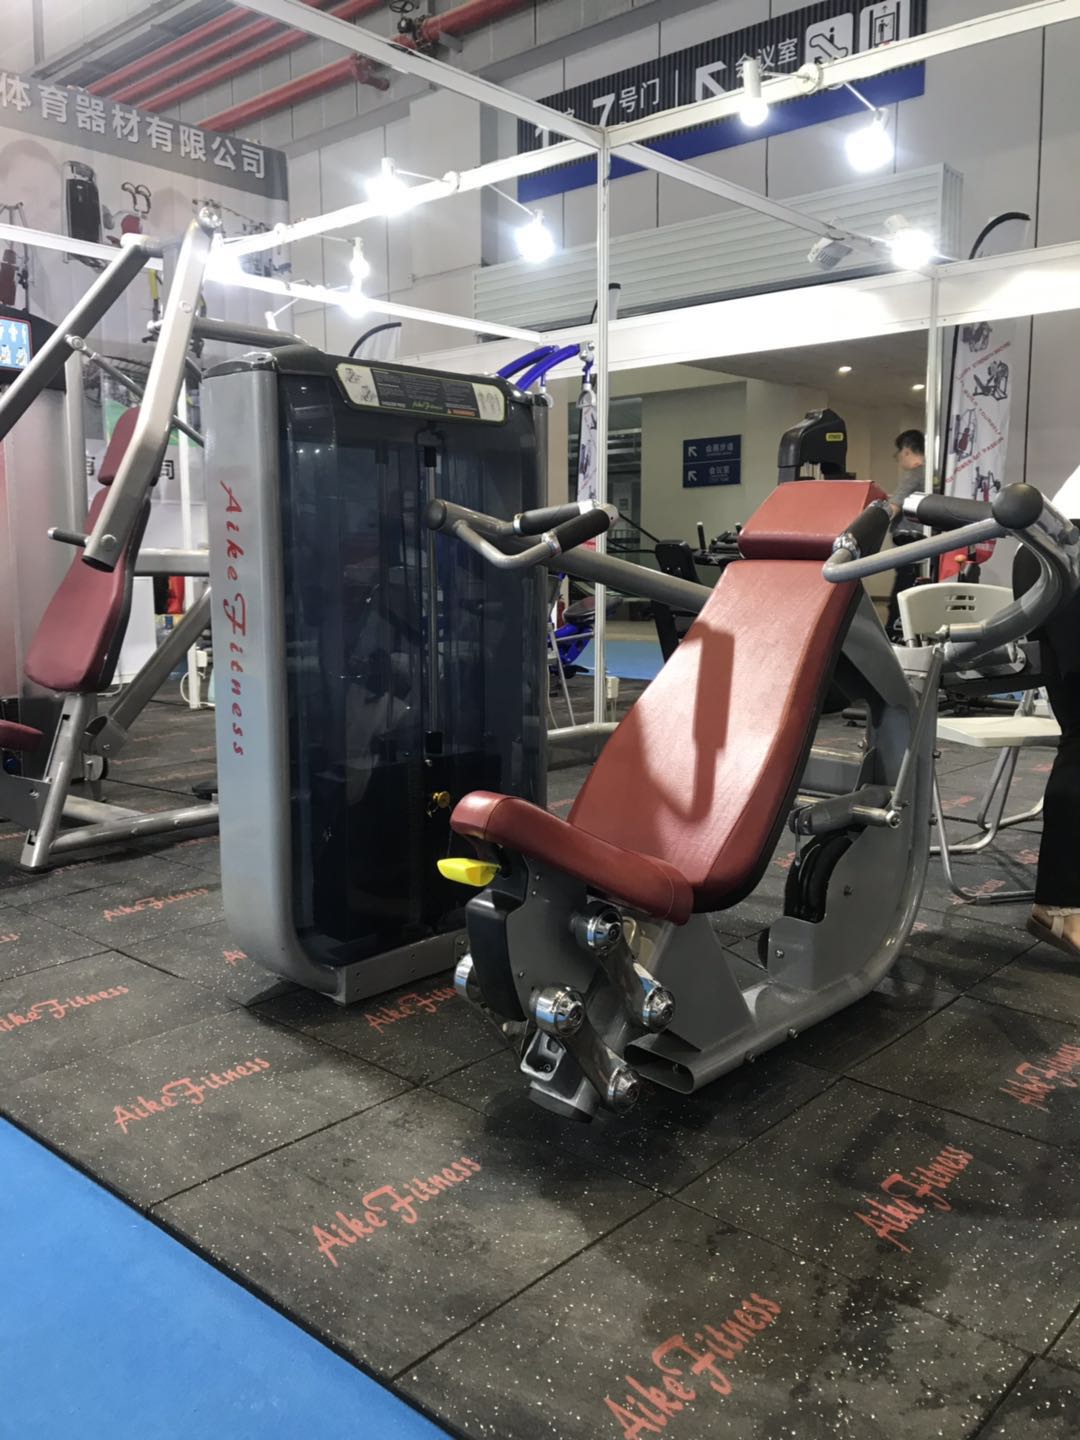 aikefitness in China sports show 2019